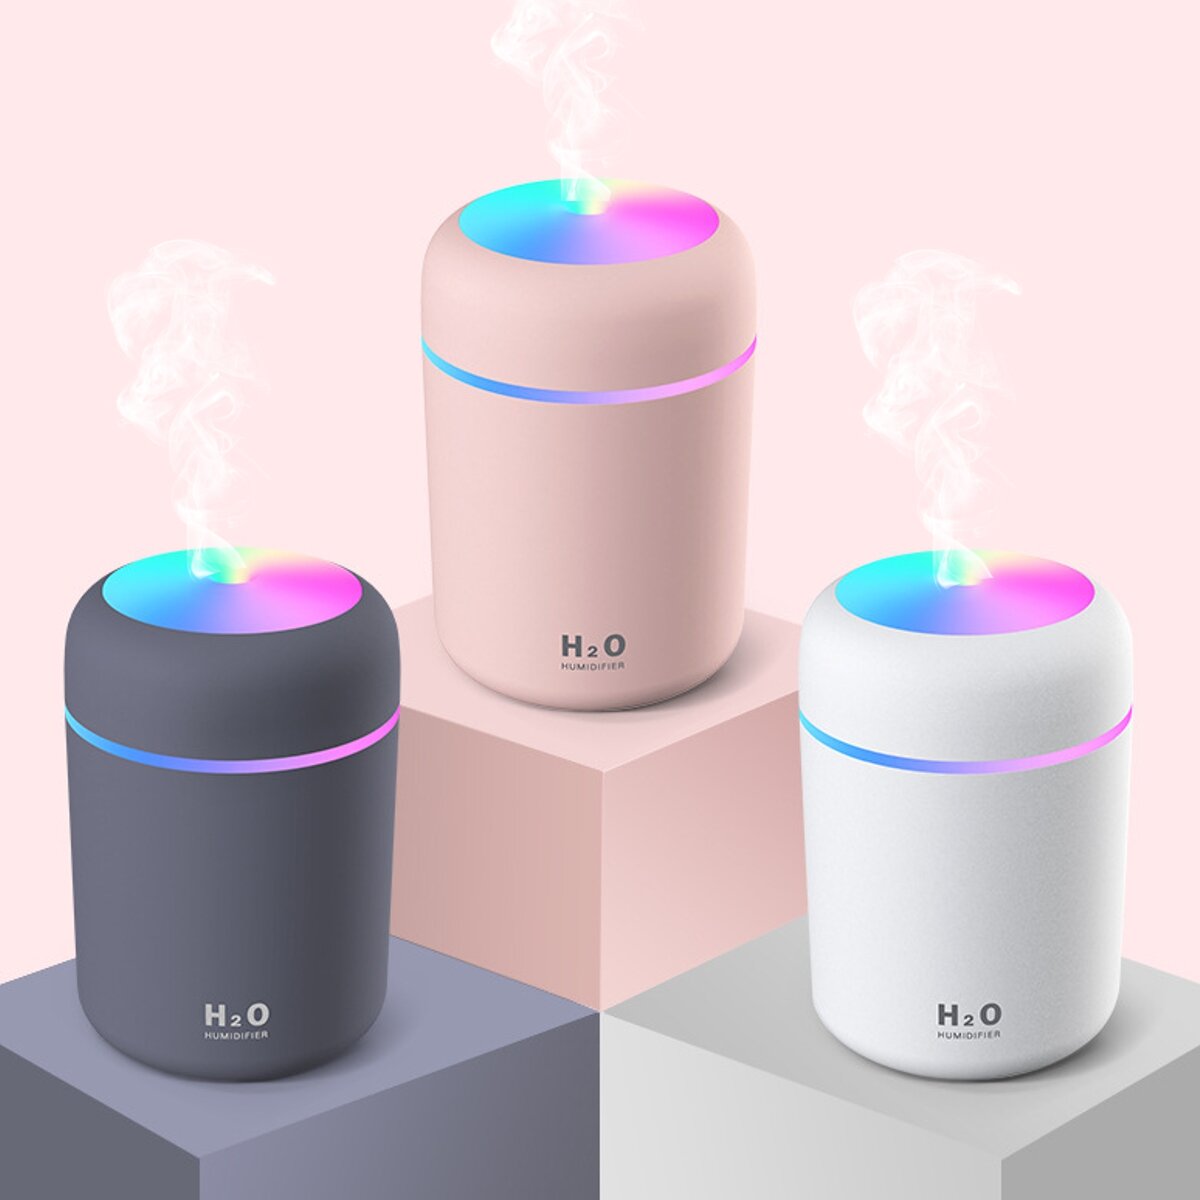 300ml Ultrasonic Electric Air Aroma Diffuser Humidifier 2 Modes LED Night Light...